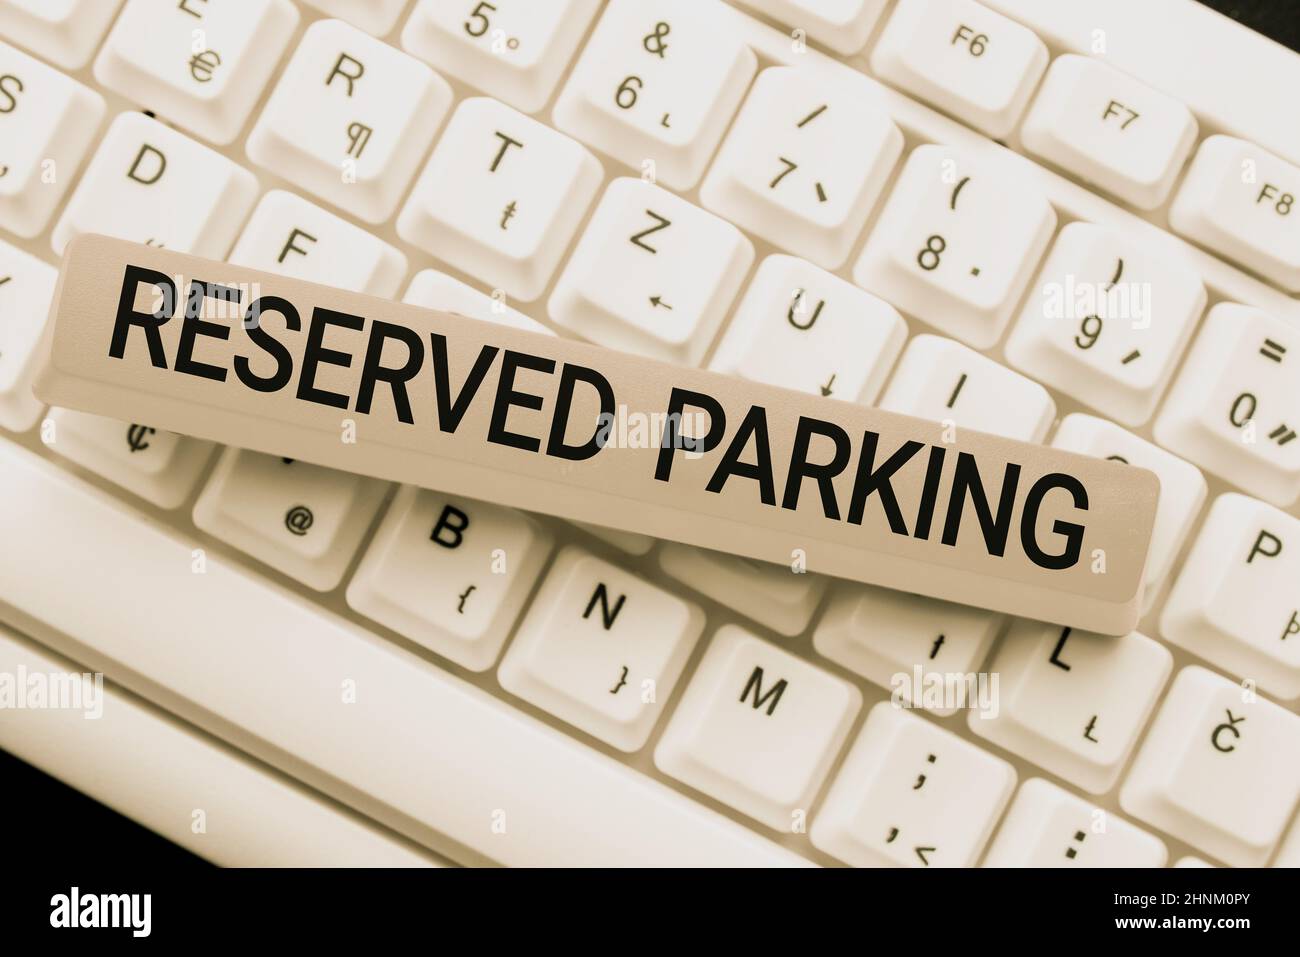 Text showing inspiration Reserved Parking, Business concept parking spaces that are reserved for specific individuals Downloading Online Files And Dat Stock Photo